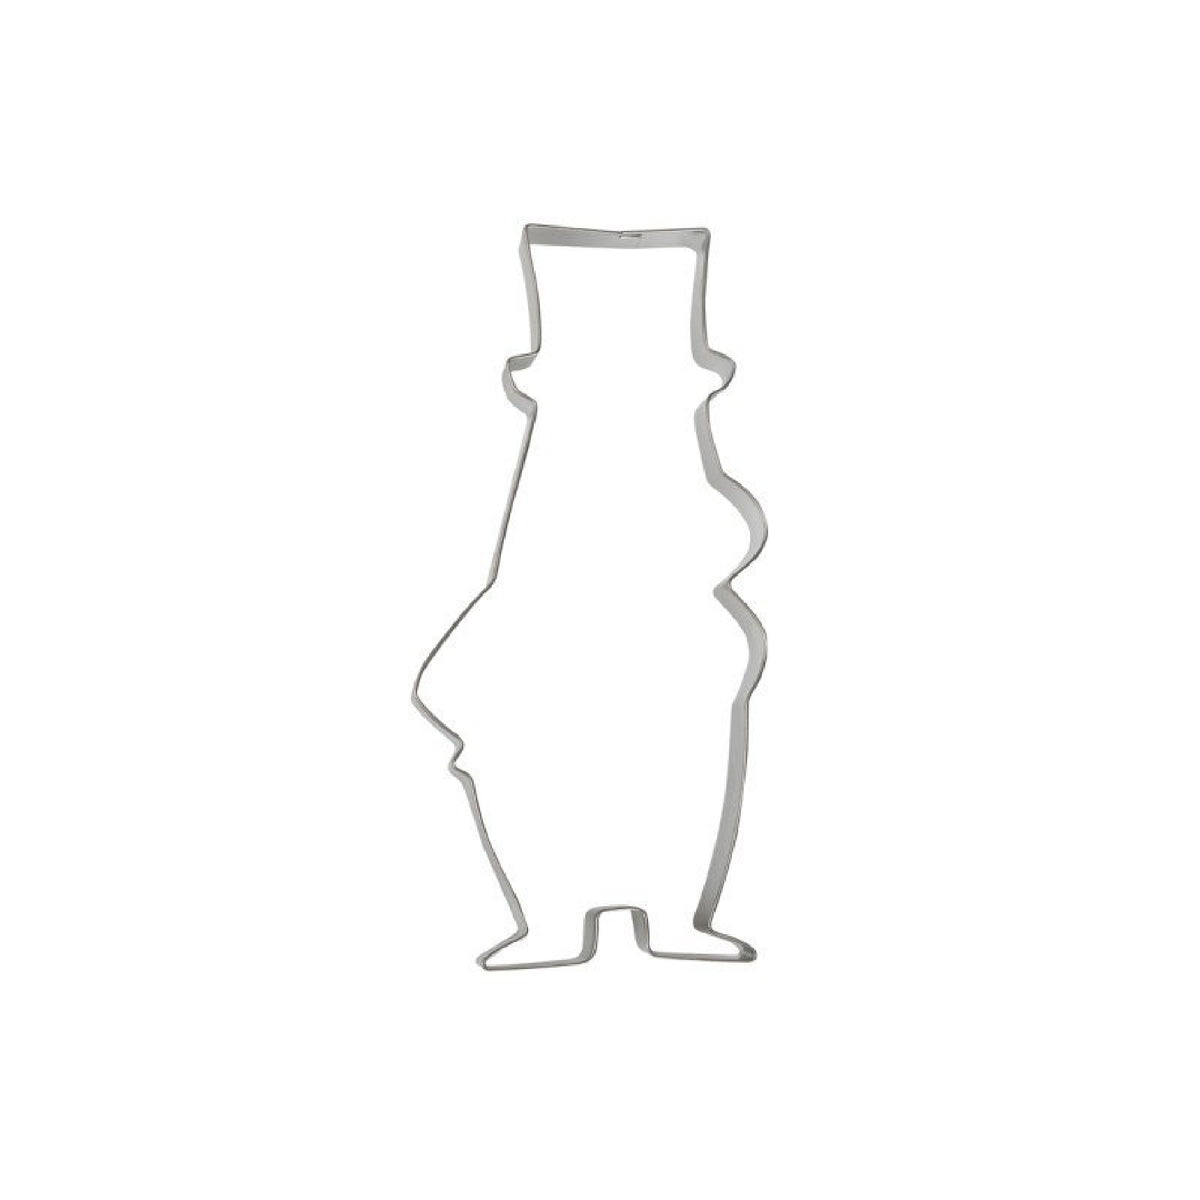 Moominpappa Cookie Cutter Small